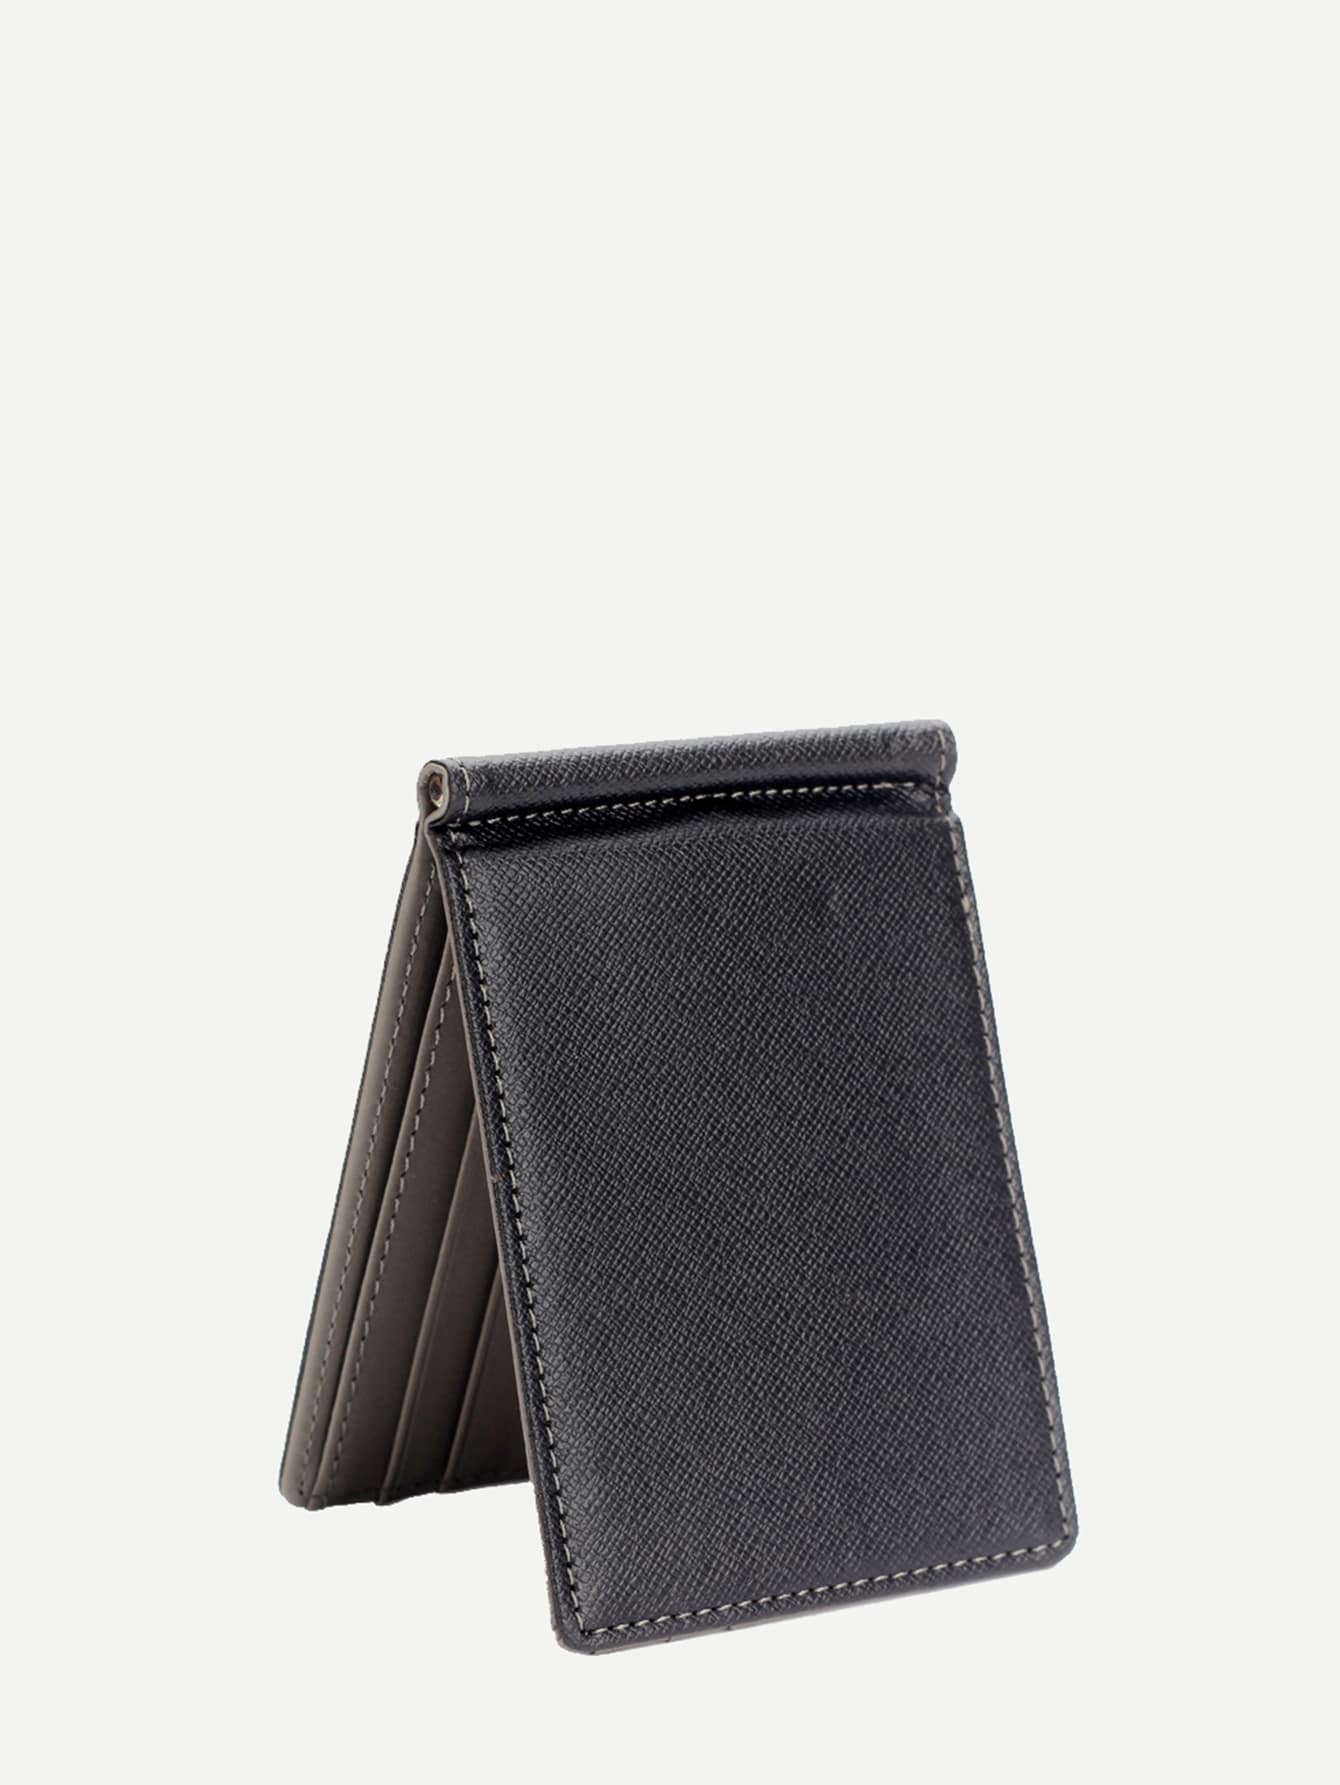 PU Leather Grey Fold Over Wallet With Card Holder